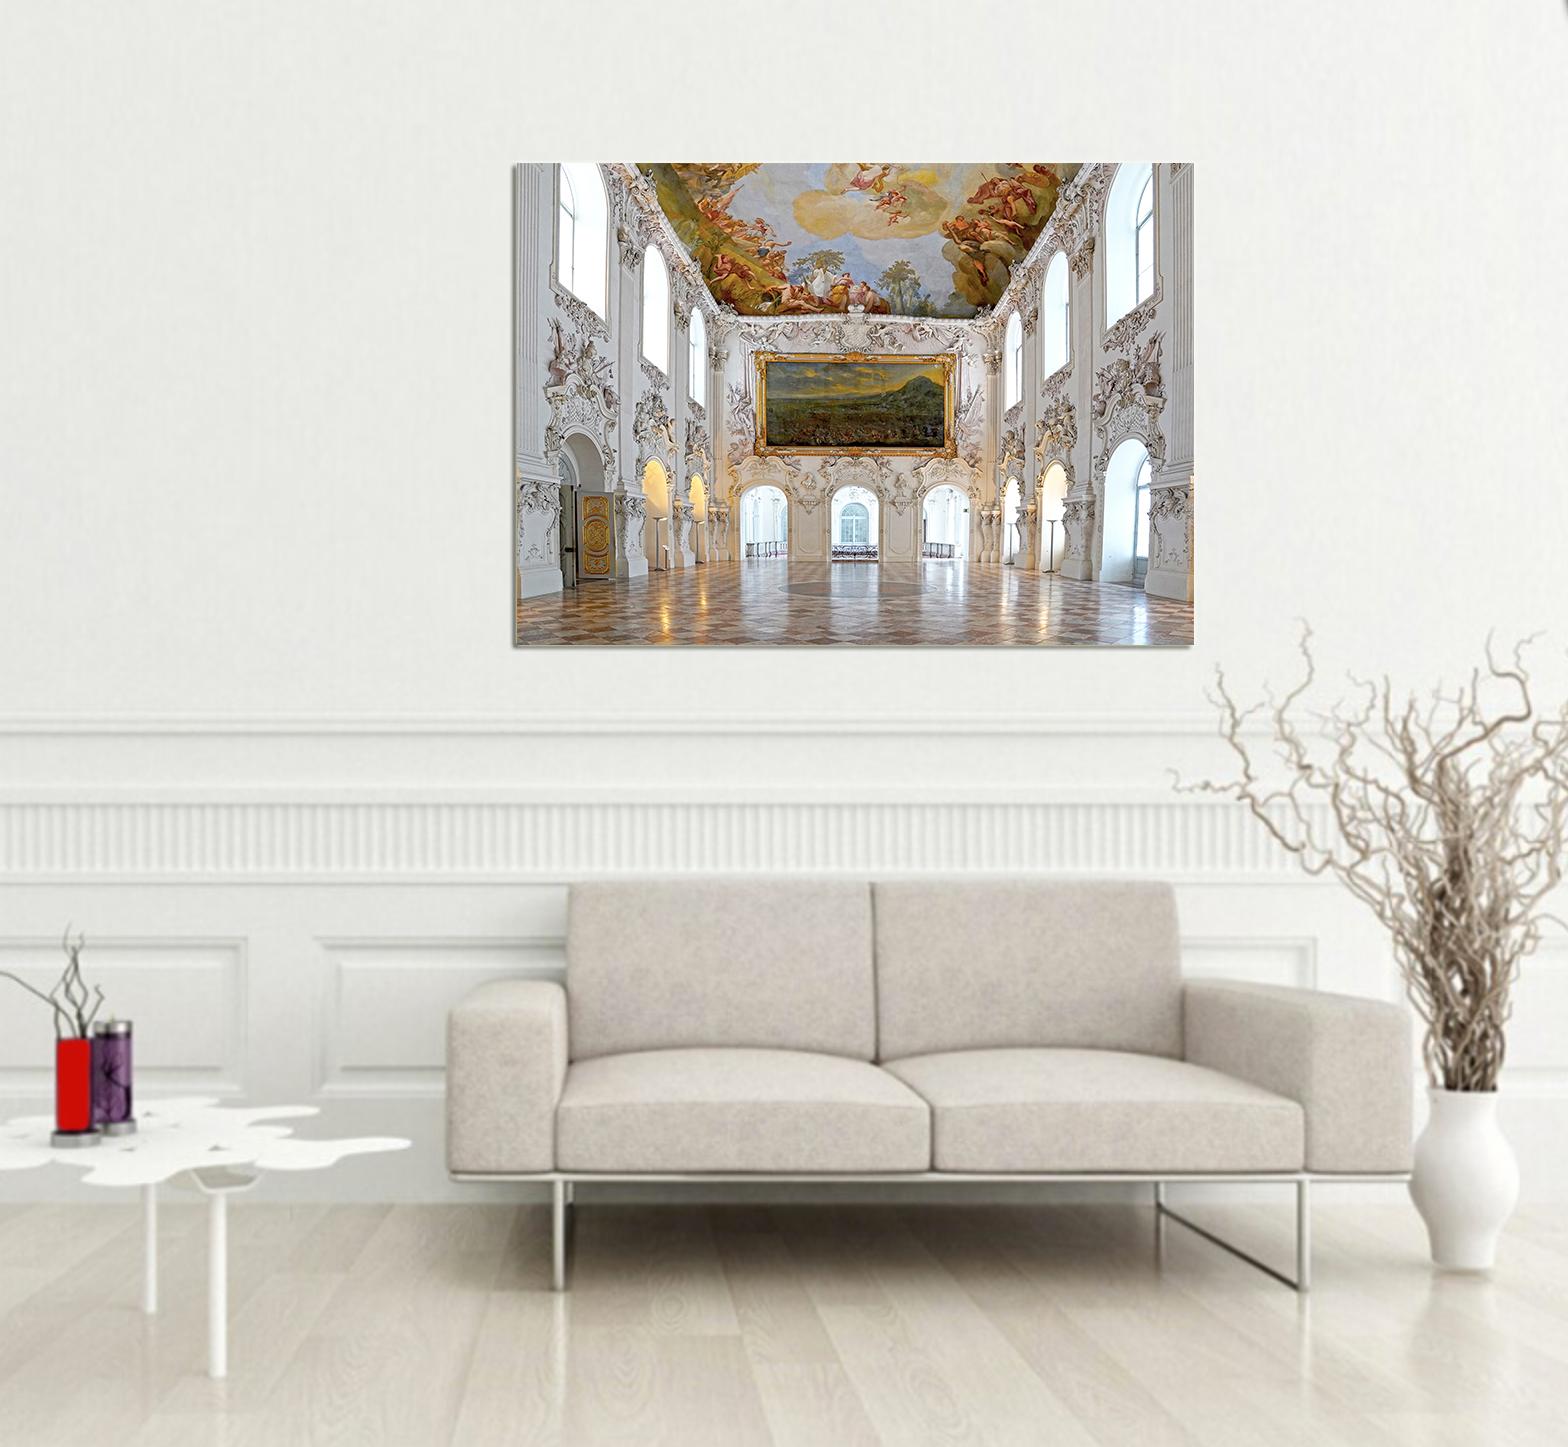 Palace Paradise by Moritz Hormel contemporary photography of a palace interior 2